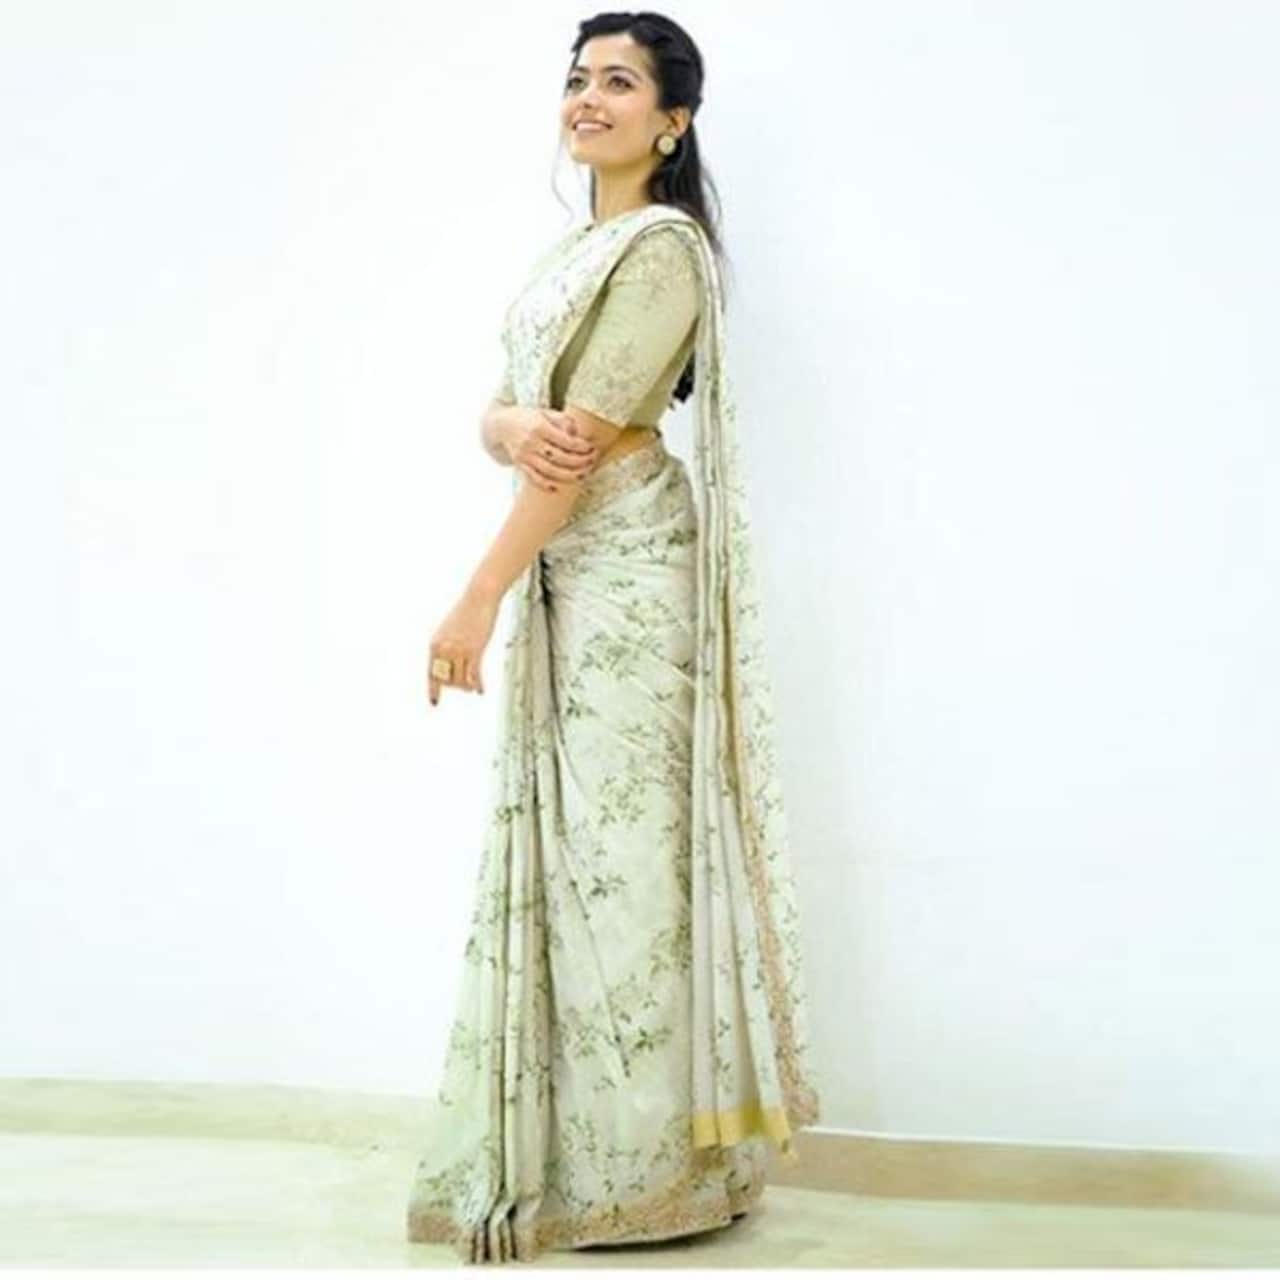 Rashmika Mandanna looks ethereal in saree and THESE pics are proof